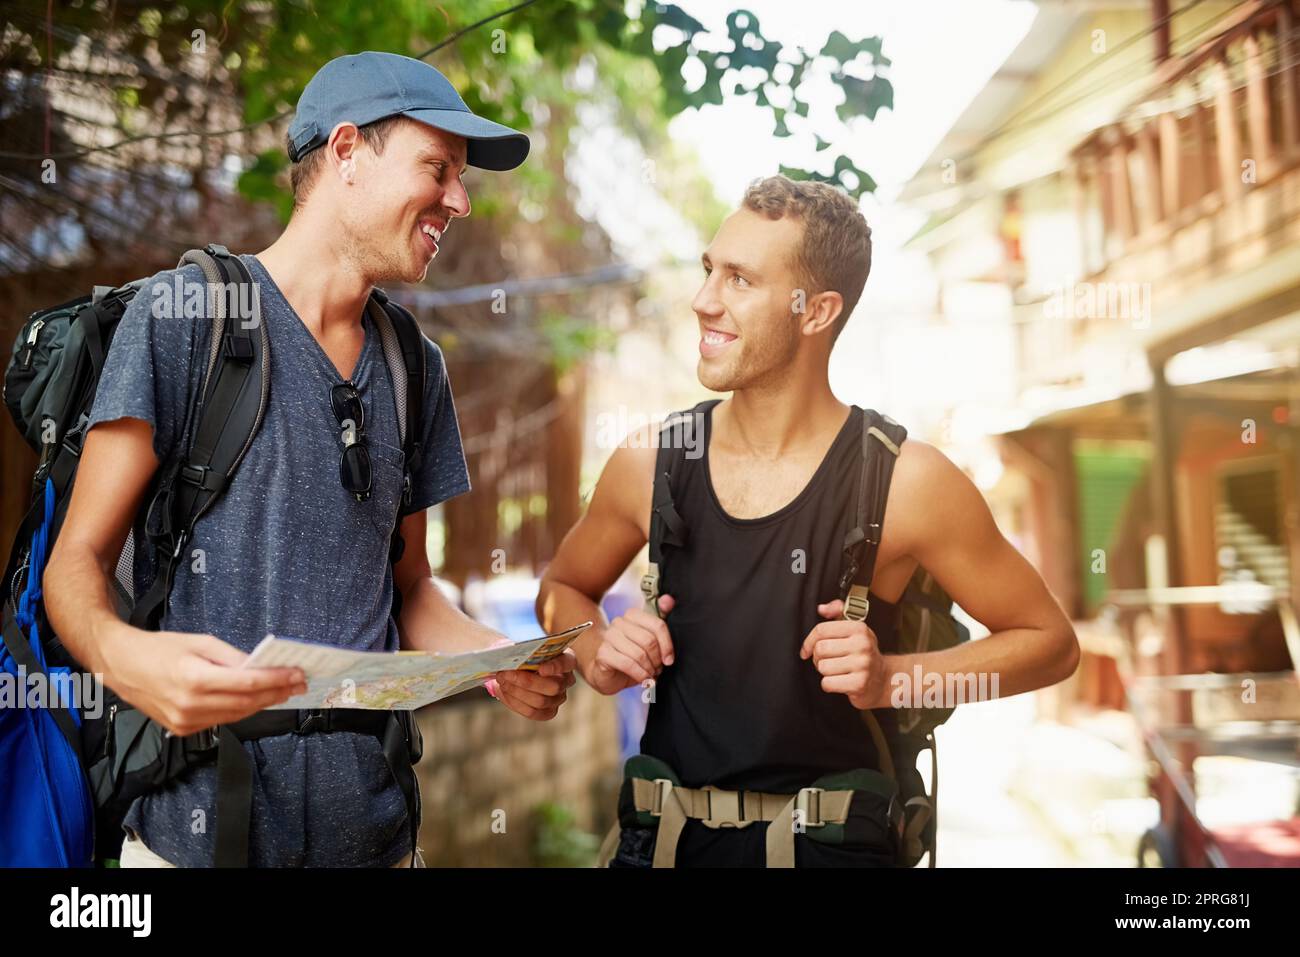 Theyve got places to see. two smiling young friends wearing backpacks traveling talking together over a map while in Thailand. Stock Photo